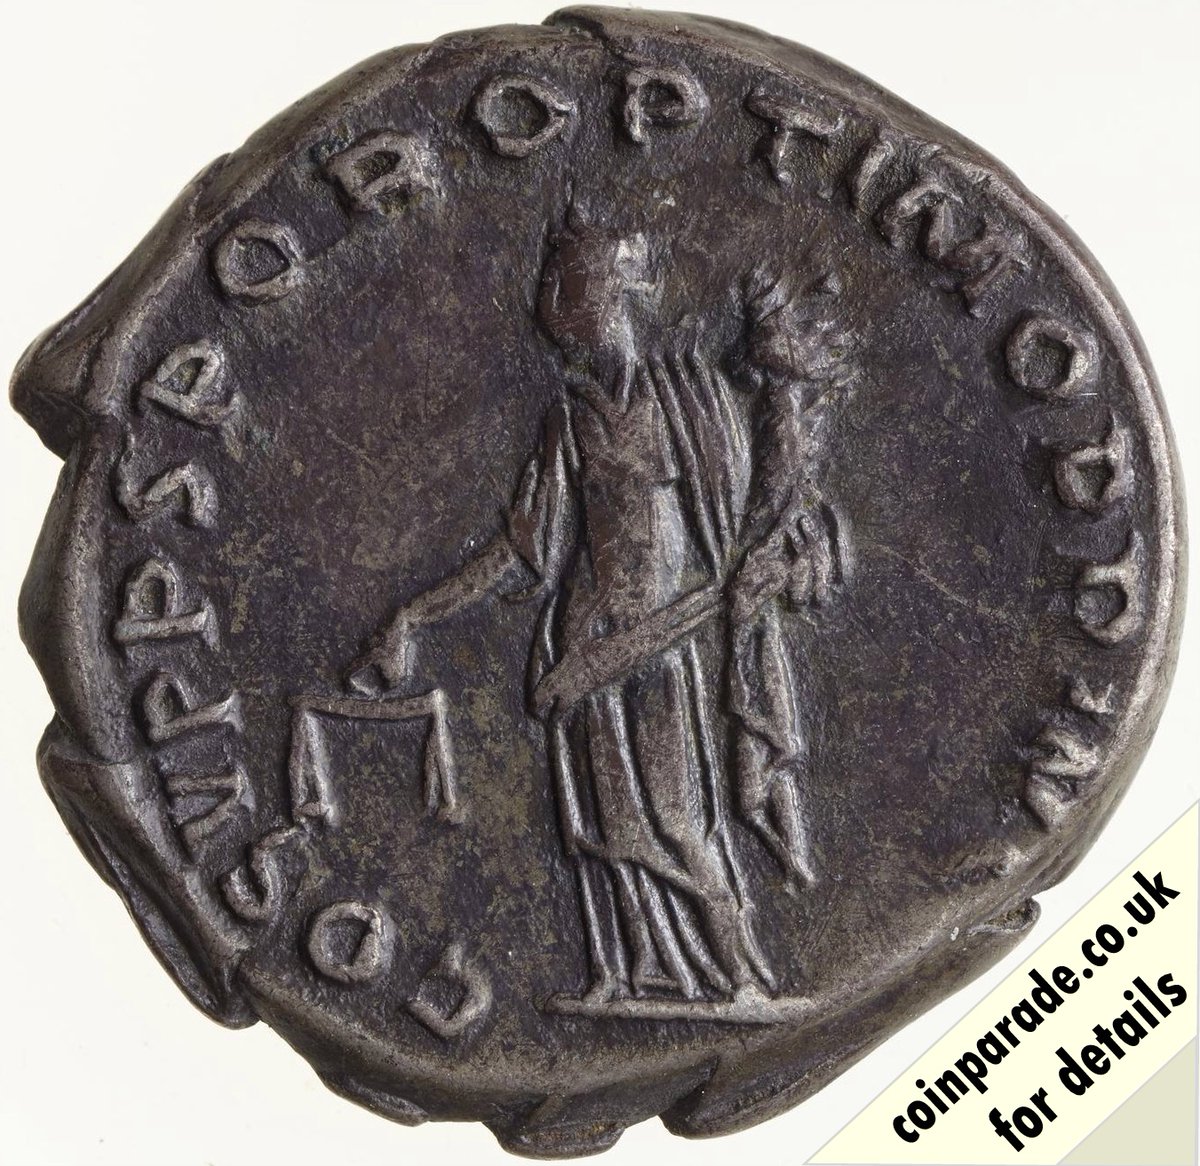 The 103-111AD Denarius - Trajan: The Reverse shows Aequitas, the Roman Goddess of Fairness, standing with balance scales and carrying cornucopiae. Legend is 'COS V P P S P Q R OPTIMO PRINC'. Read more at coinparade.co.uk/103-111ad-dena…